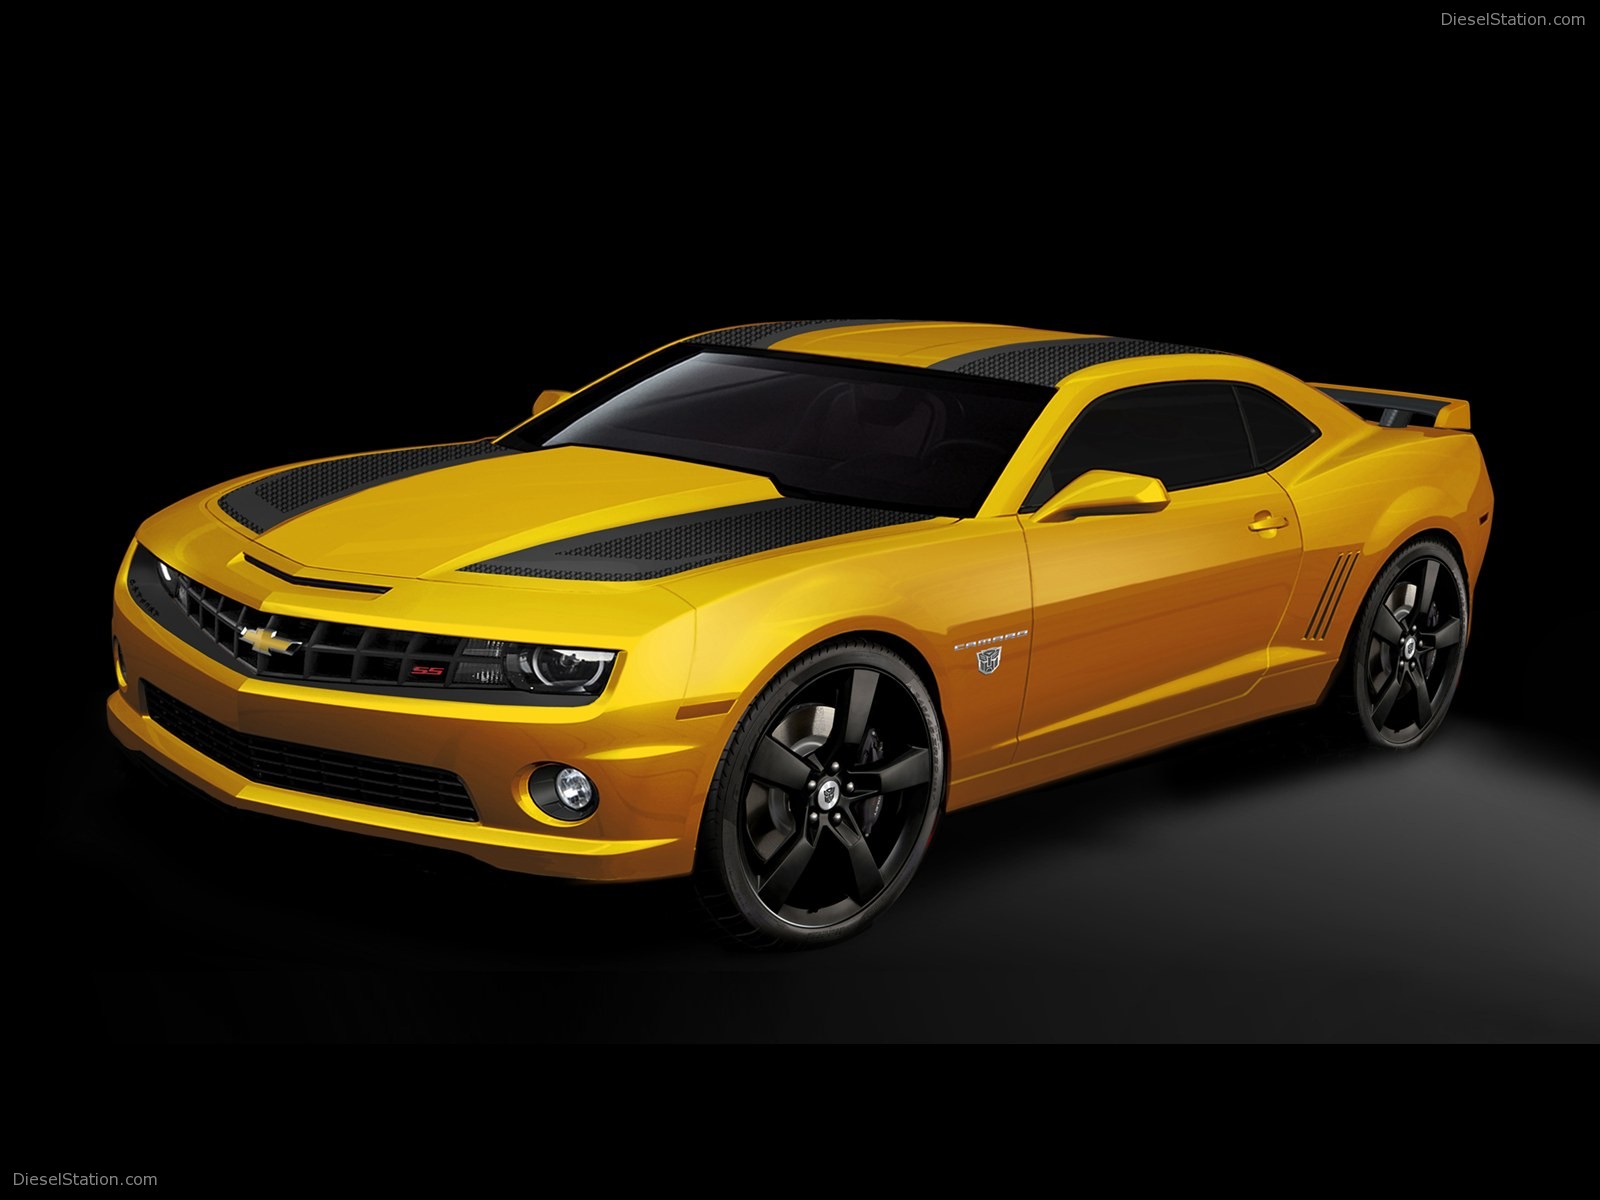 Chevy Camaro Wallpaper 4881 Hd Wallpapers in Cars   Imagescicom